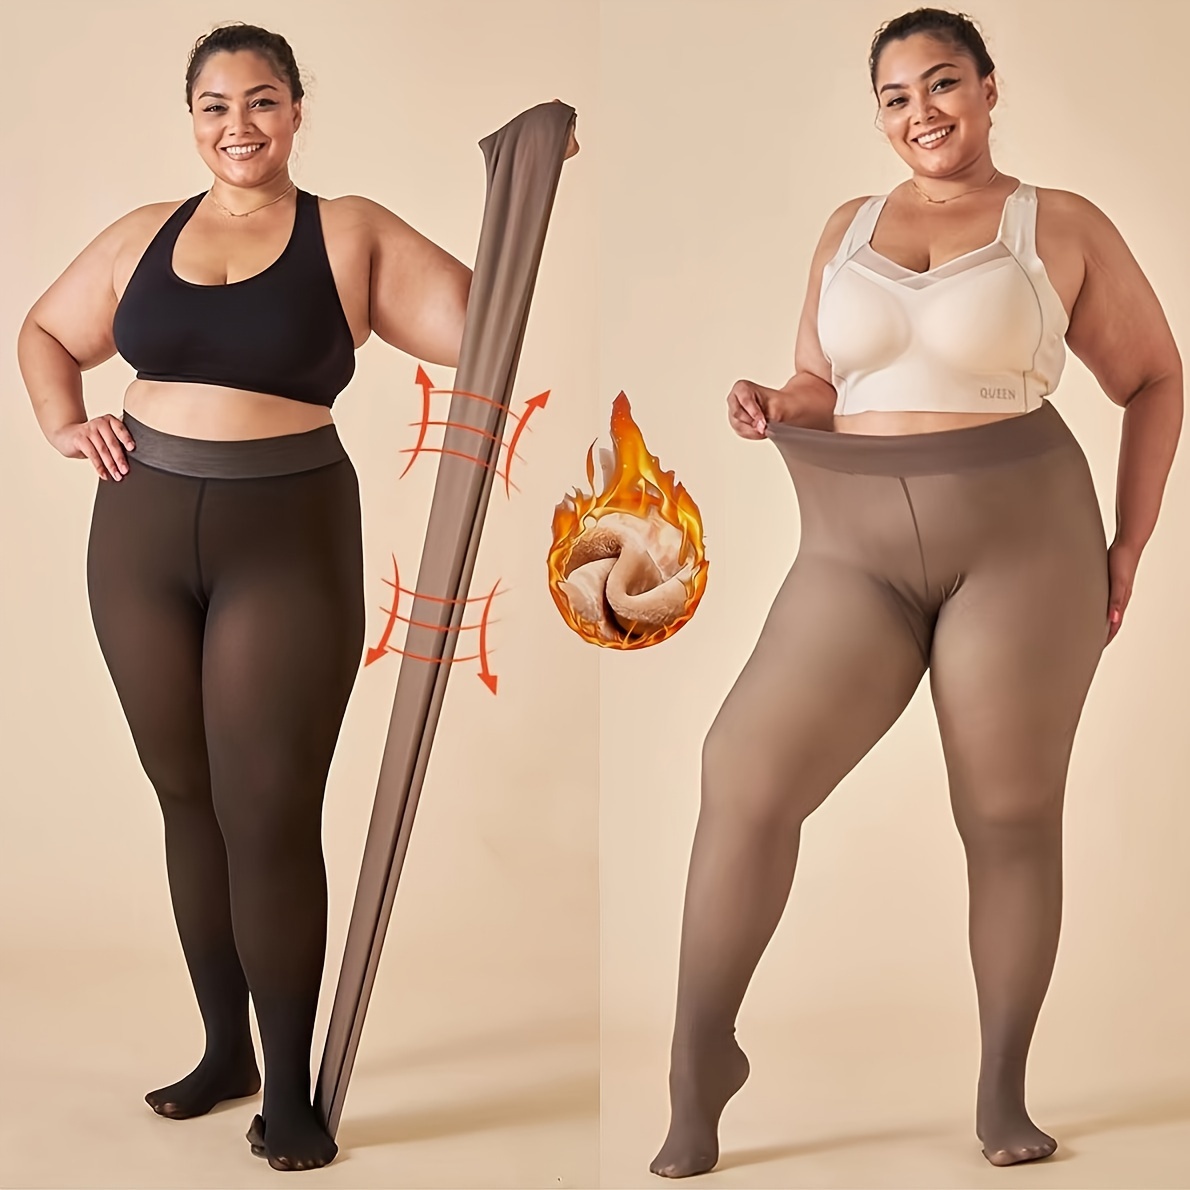 Solid color peach skin fleeced lined plus size leggings. - One